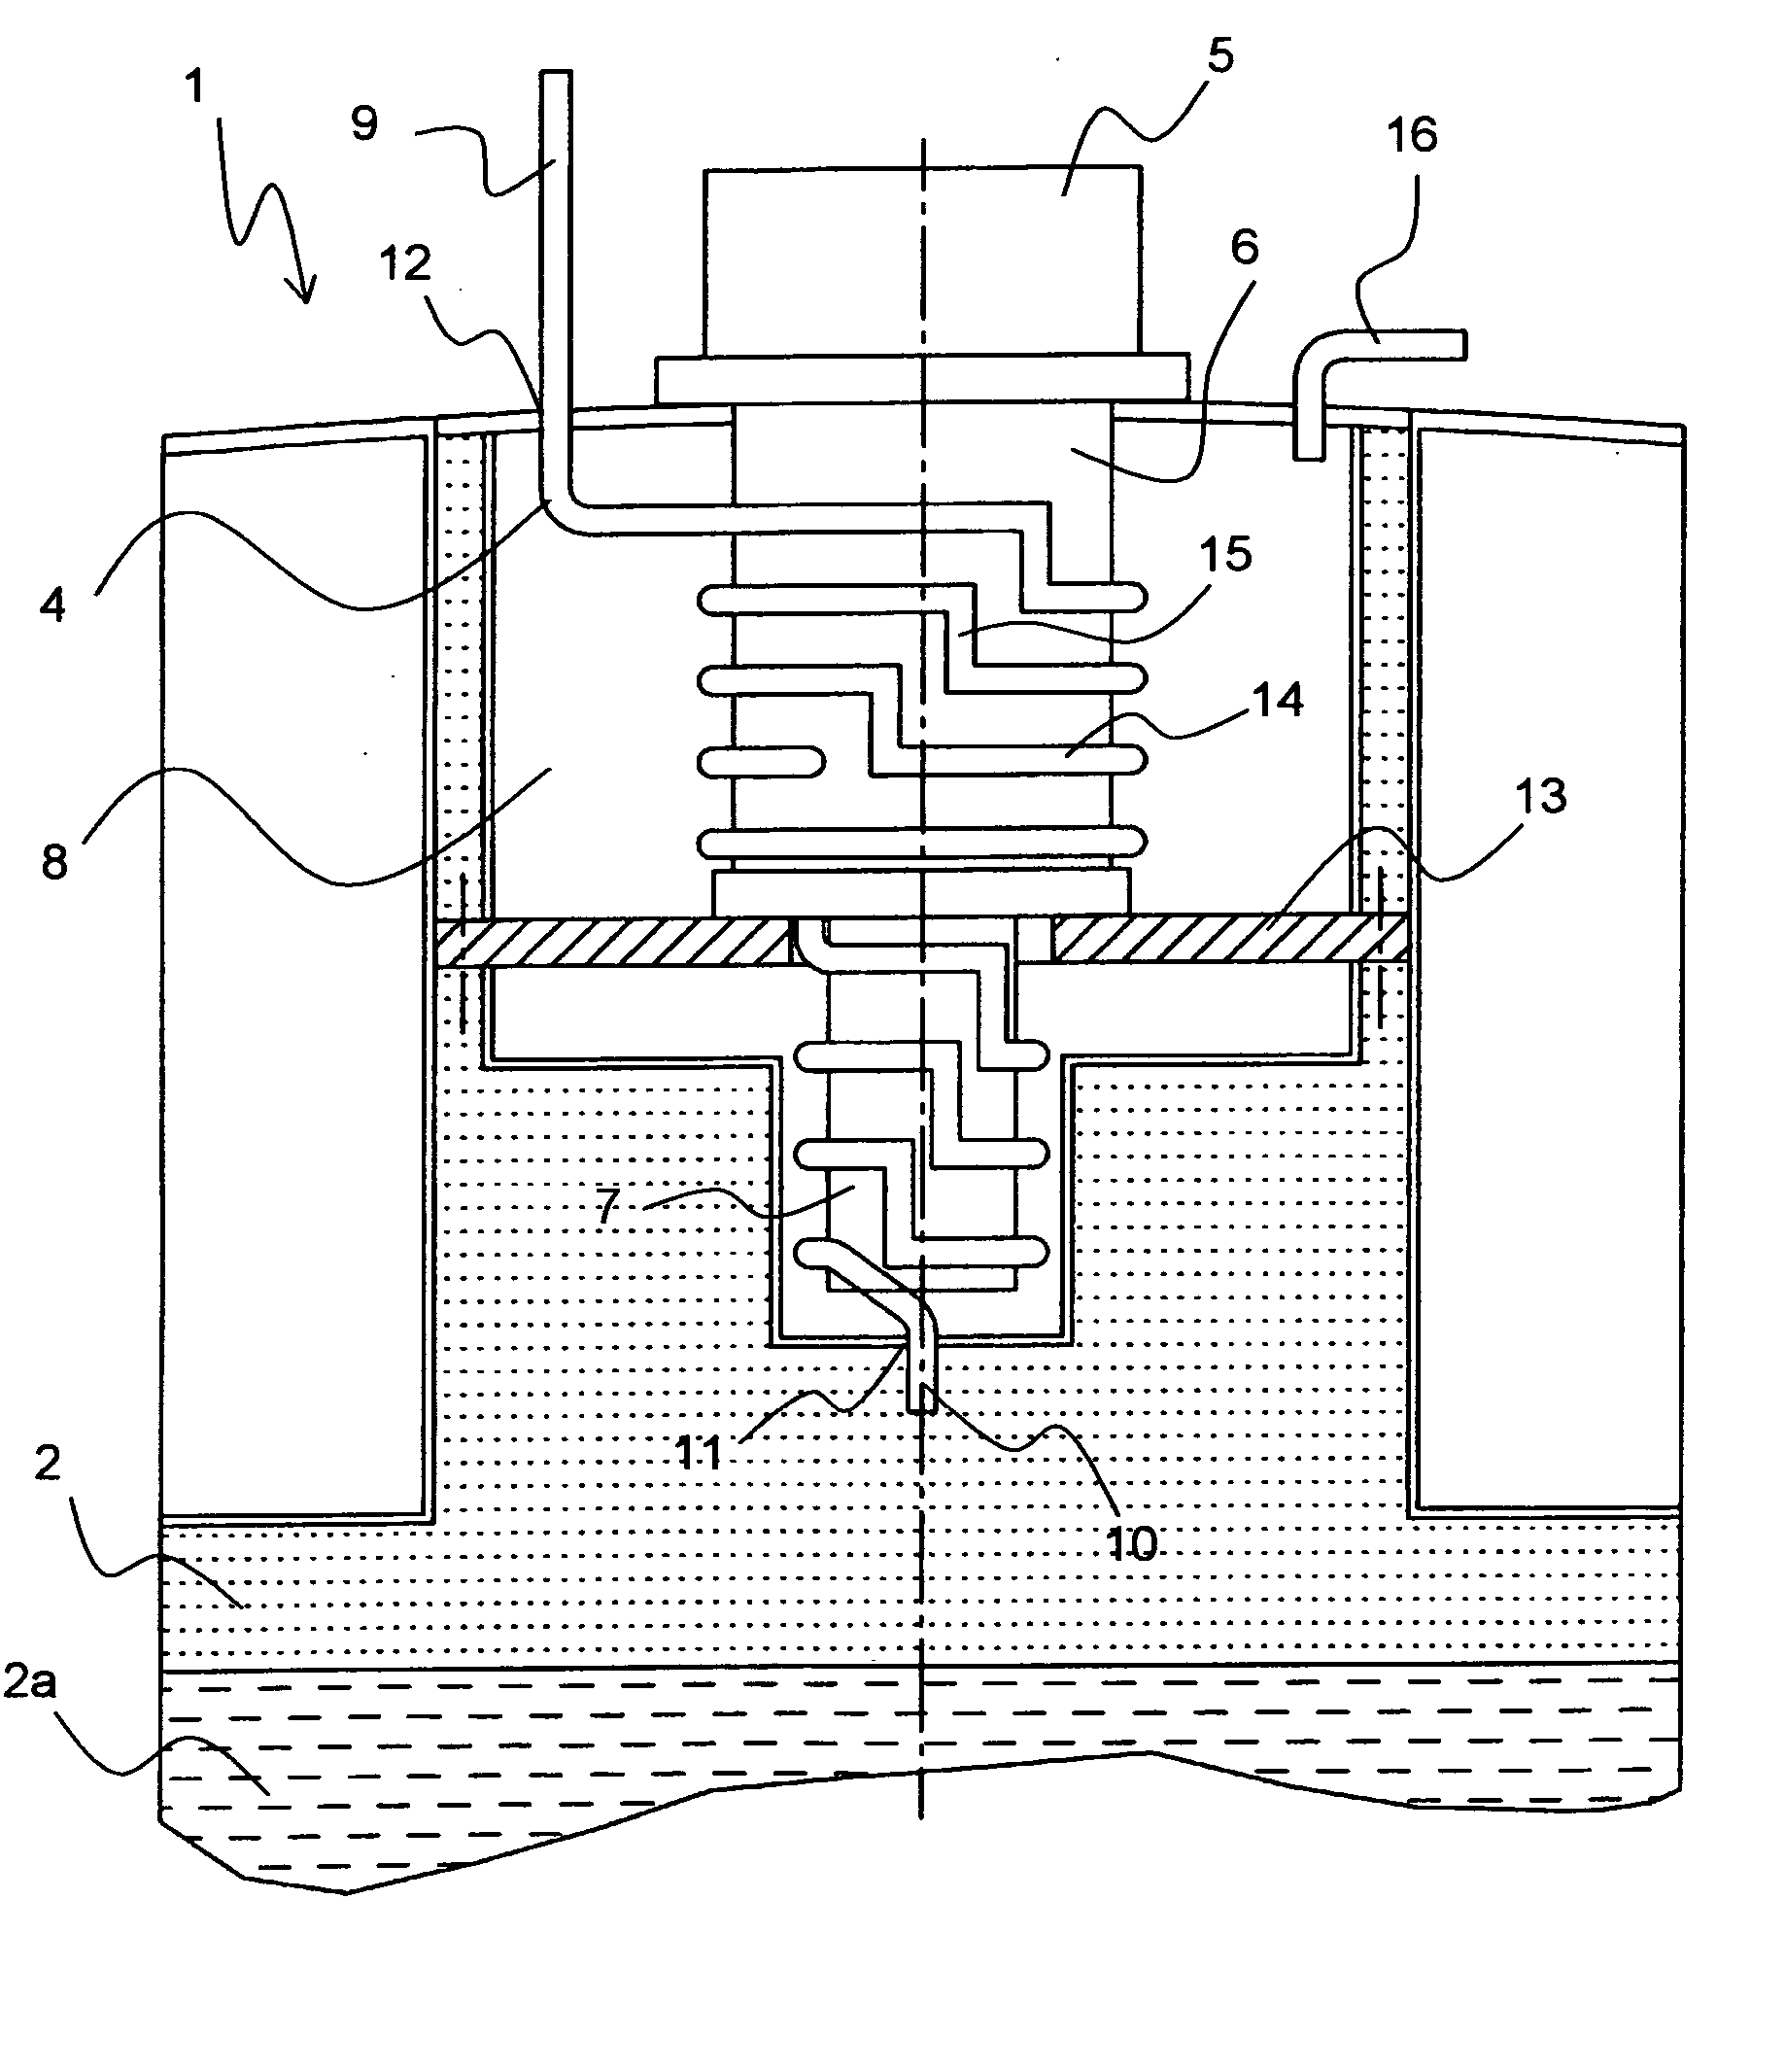 Superconducting magnet system with refrigerator for re-liquifying cryogenic fluid in a tubular conduit